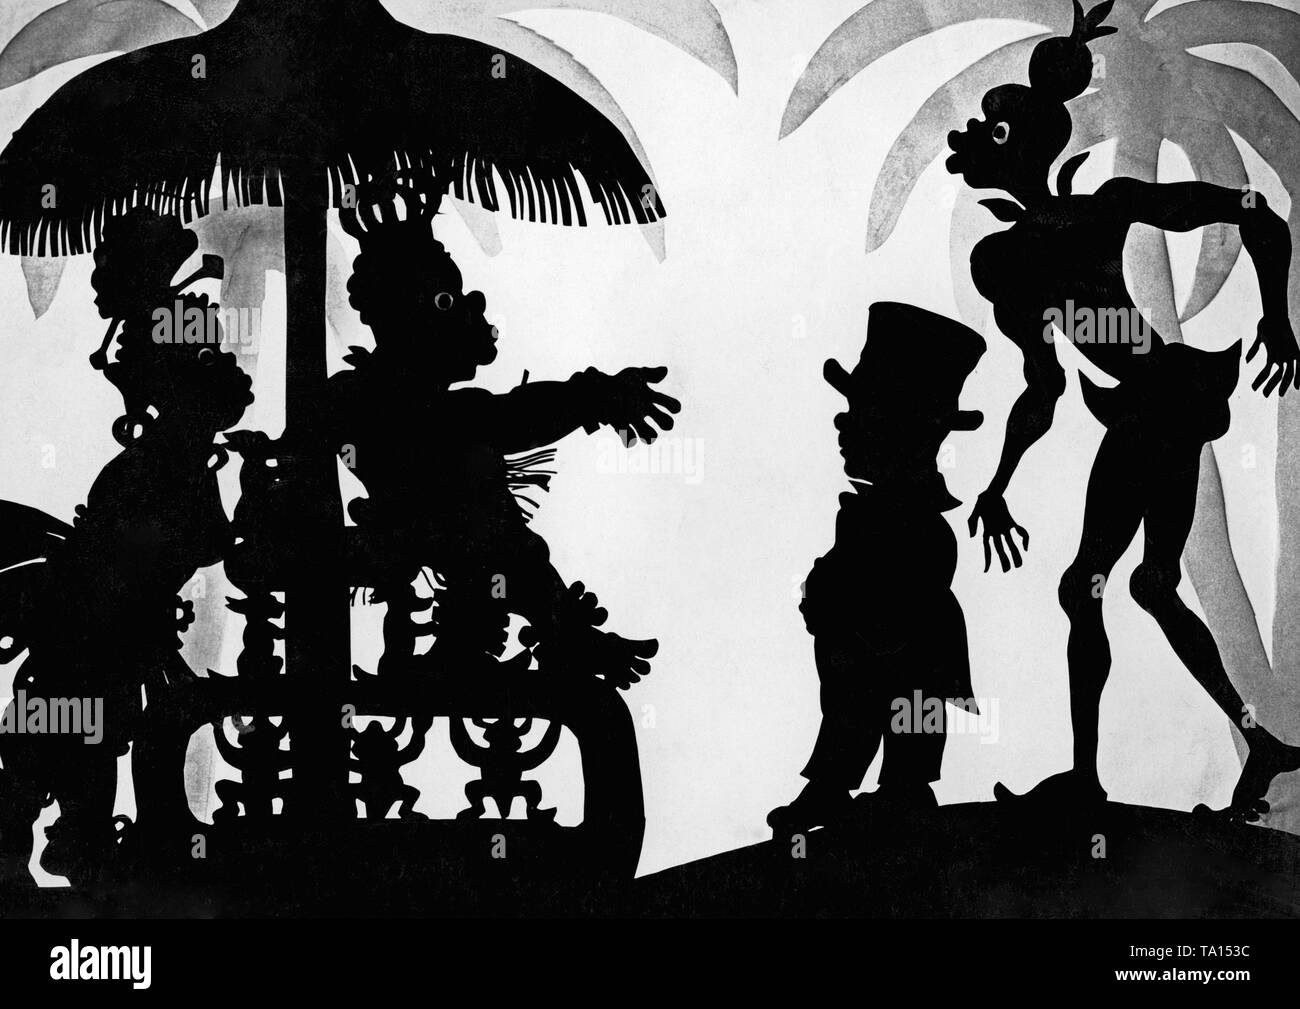 This photo shows a scene from the silhouette film 'Dr. Dolittle and His Animals' - subtitle: 'Dr. Dolittle und der Negerkoenig' by Charlotte Reiniger. The silhouette film, also known as silhouette animation, is a technique of animated film in which silhouettes are put together on a lighted glass plate in front of a white or black background to form a film. The result is the silhouette film, inspired by shadow theater and the pictorial techniques of silhouette cutting. Stock Photo